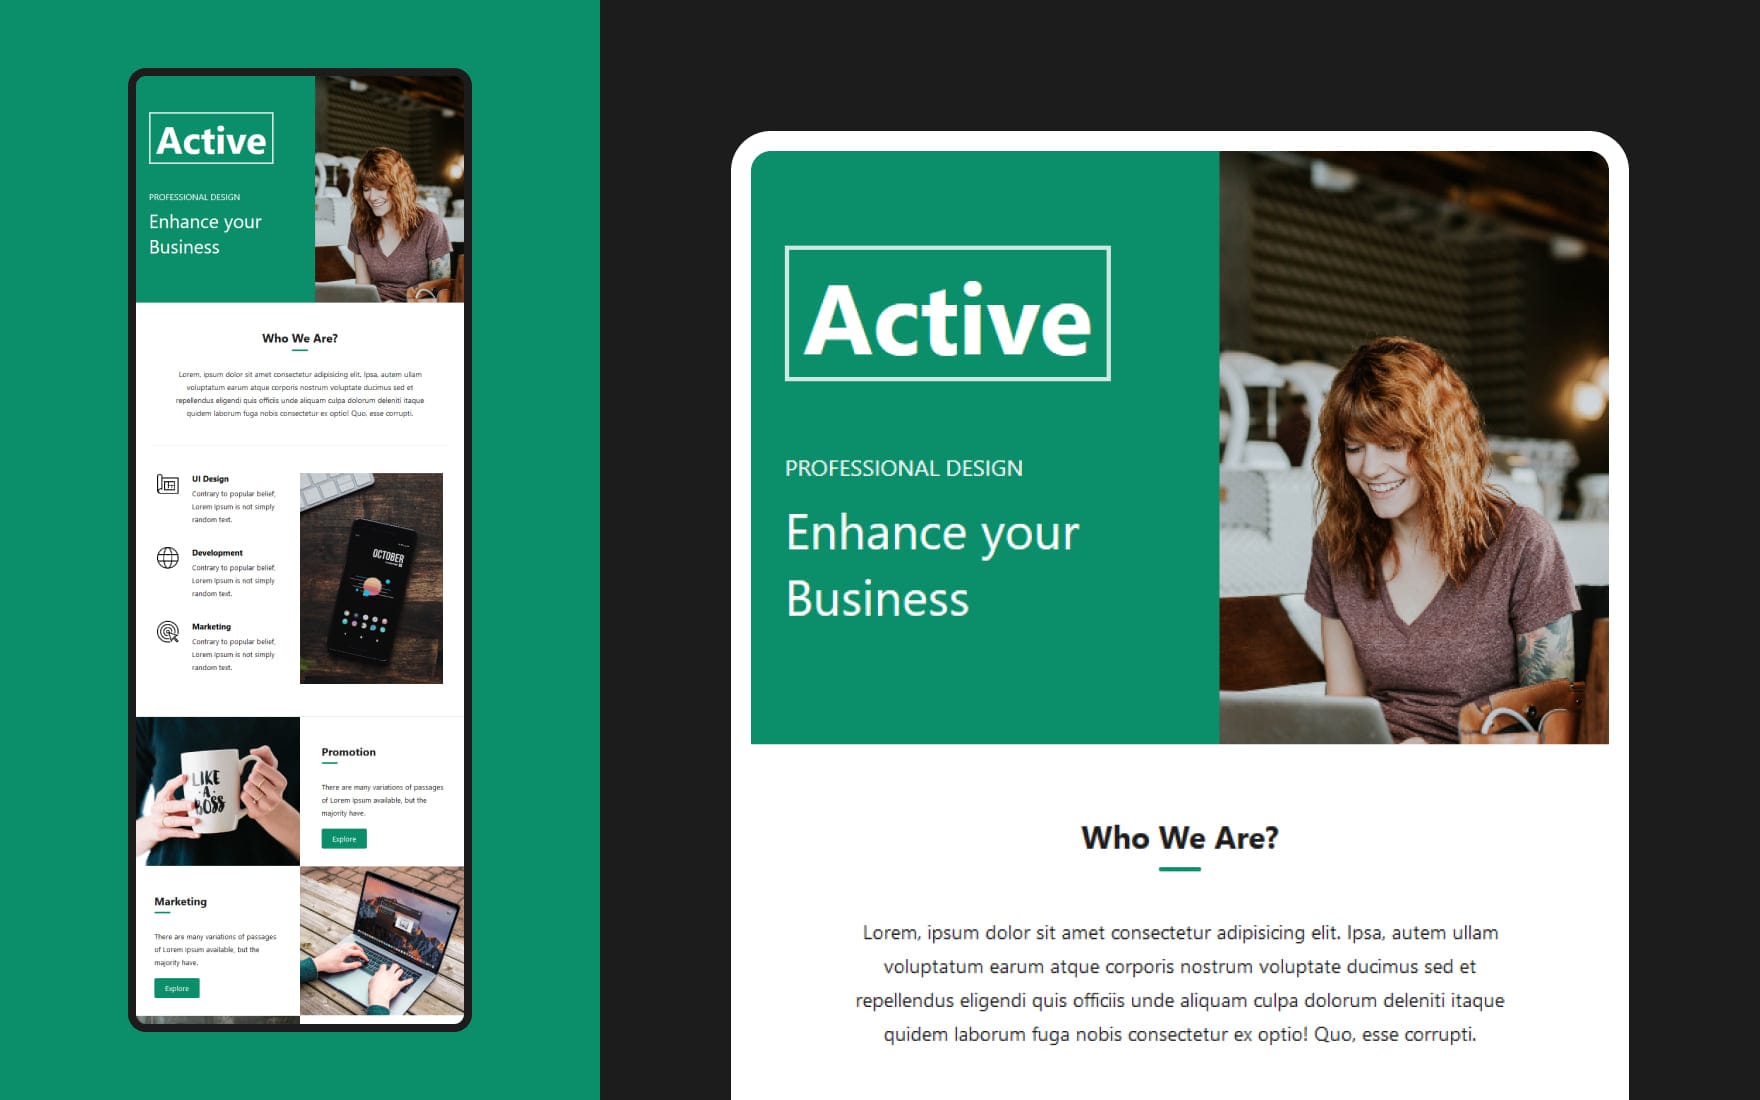 Active Featured Image